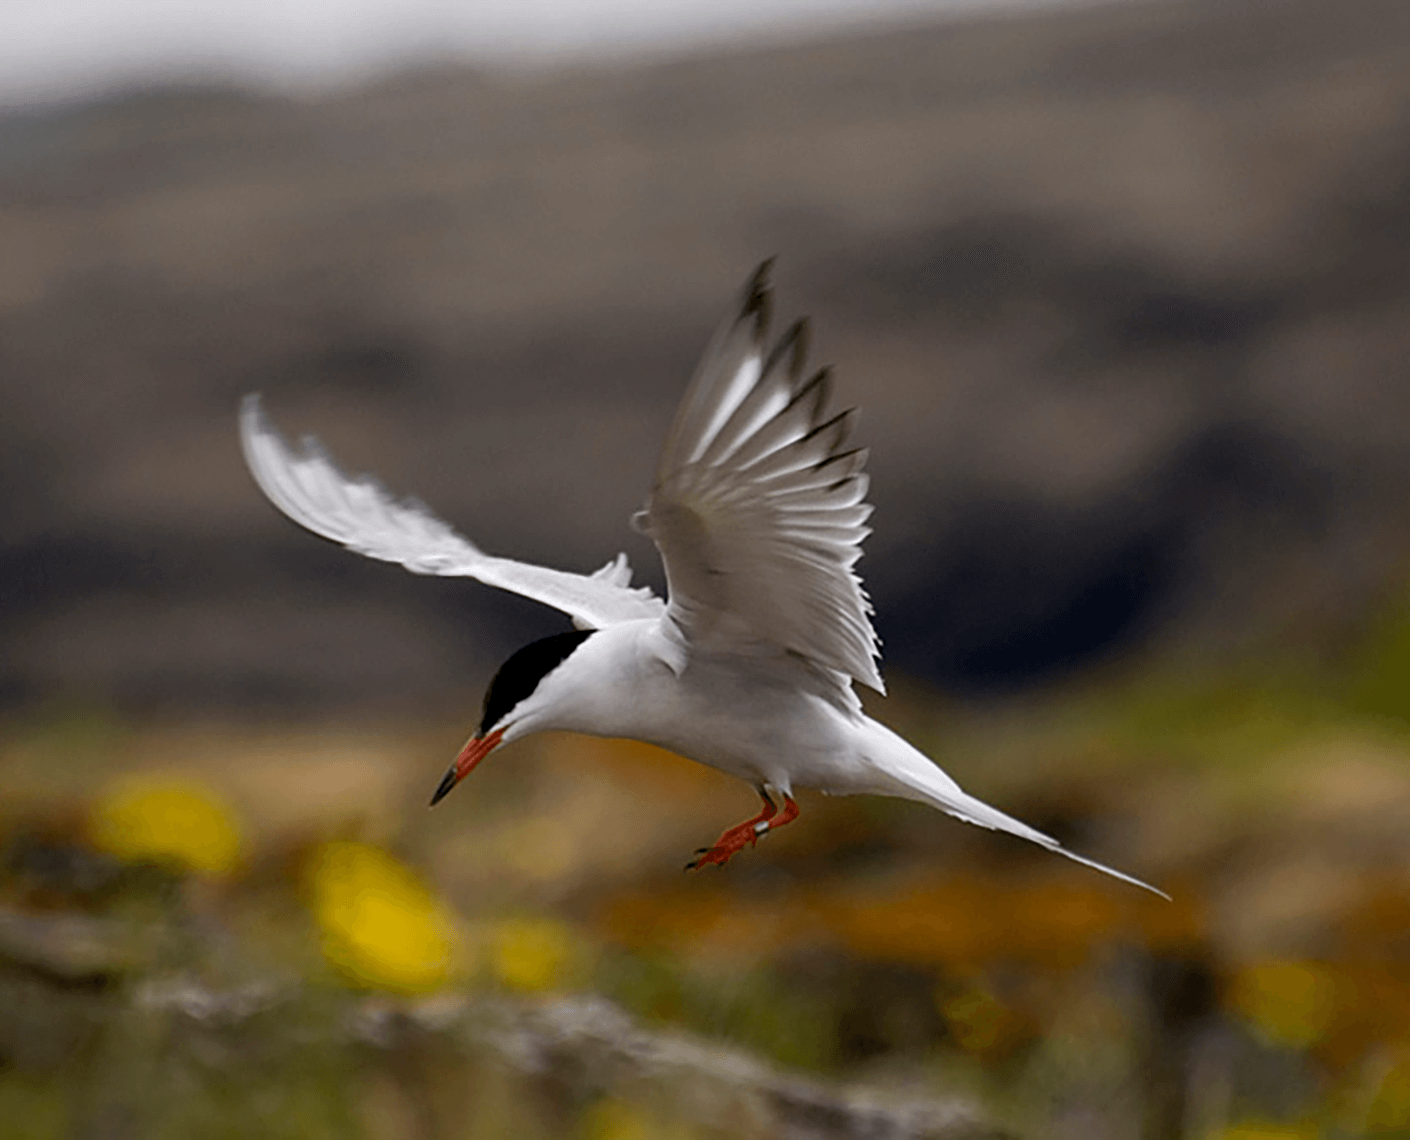 Azores islands are known to be a paradise for bird watchers